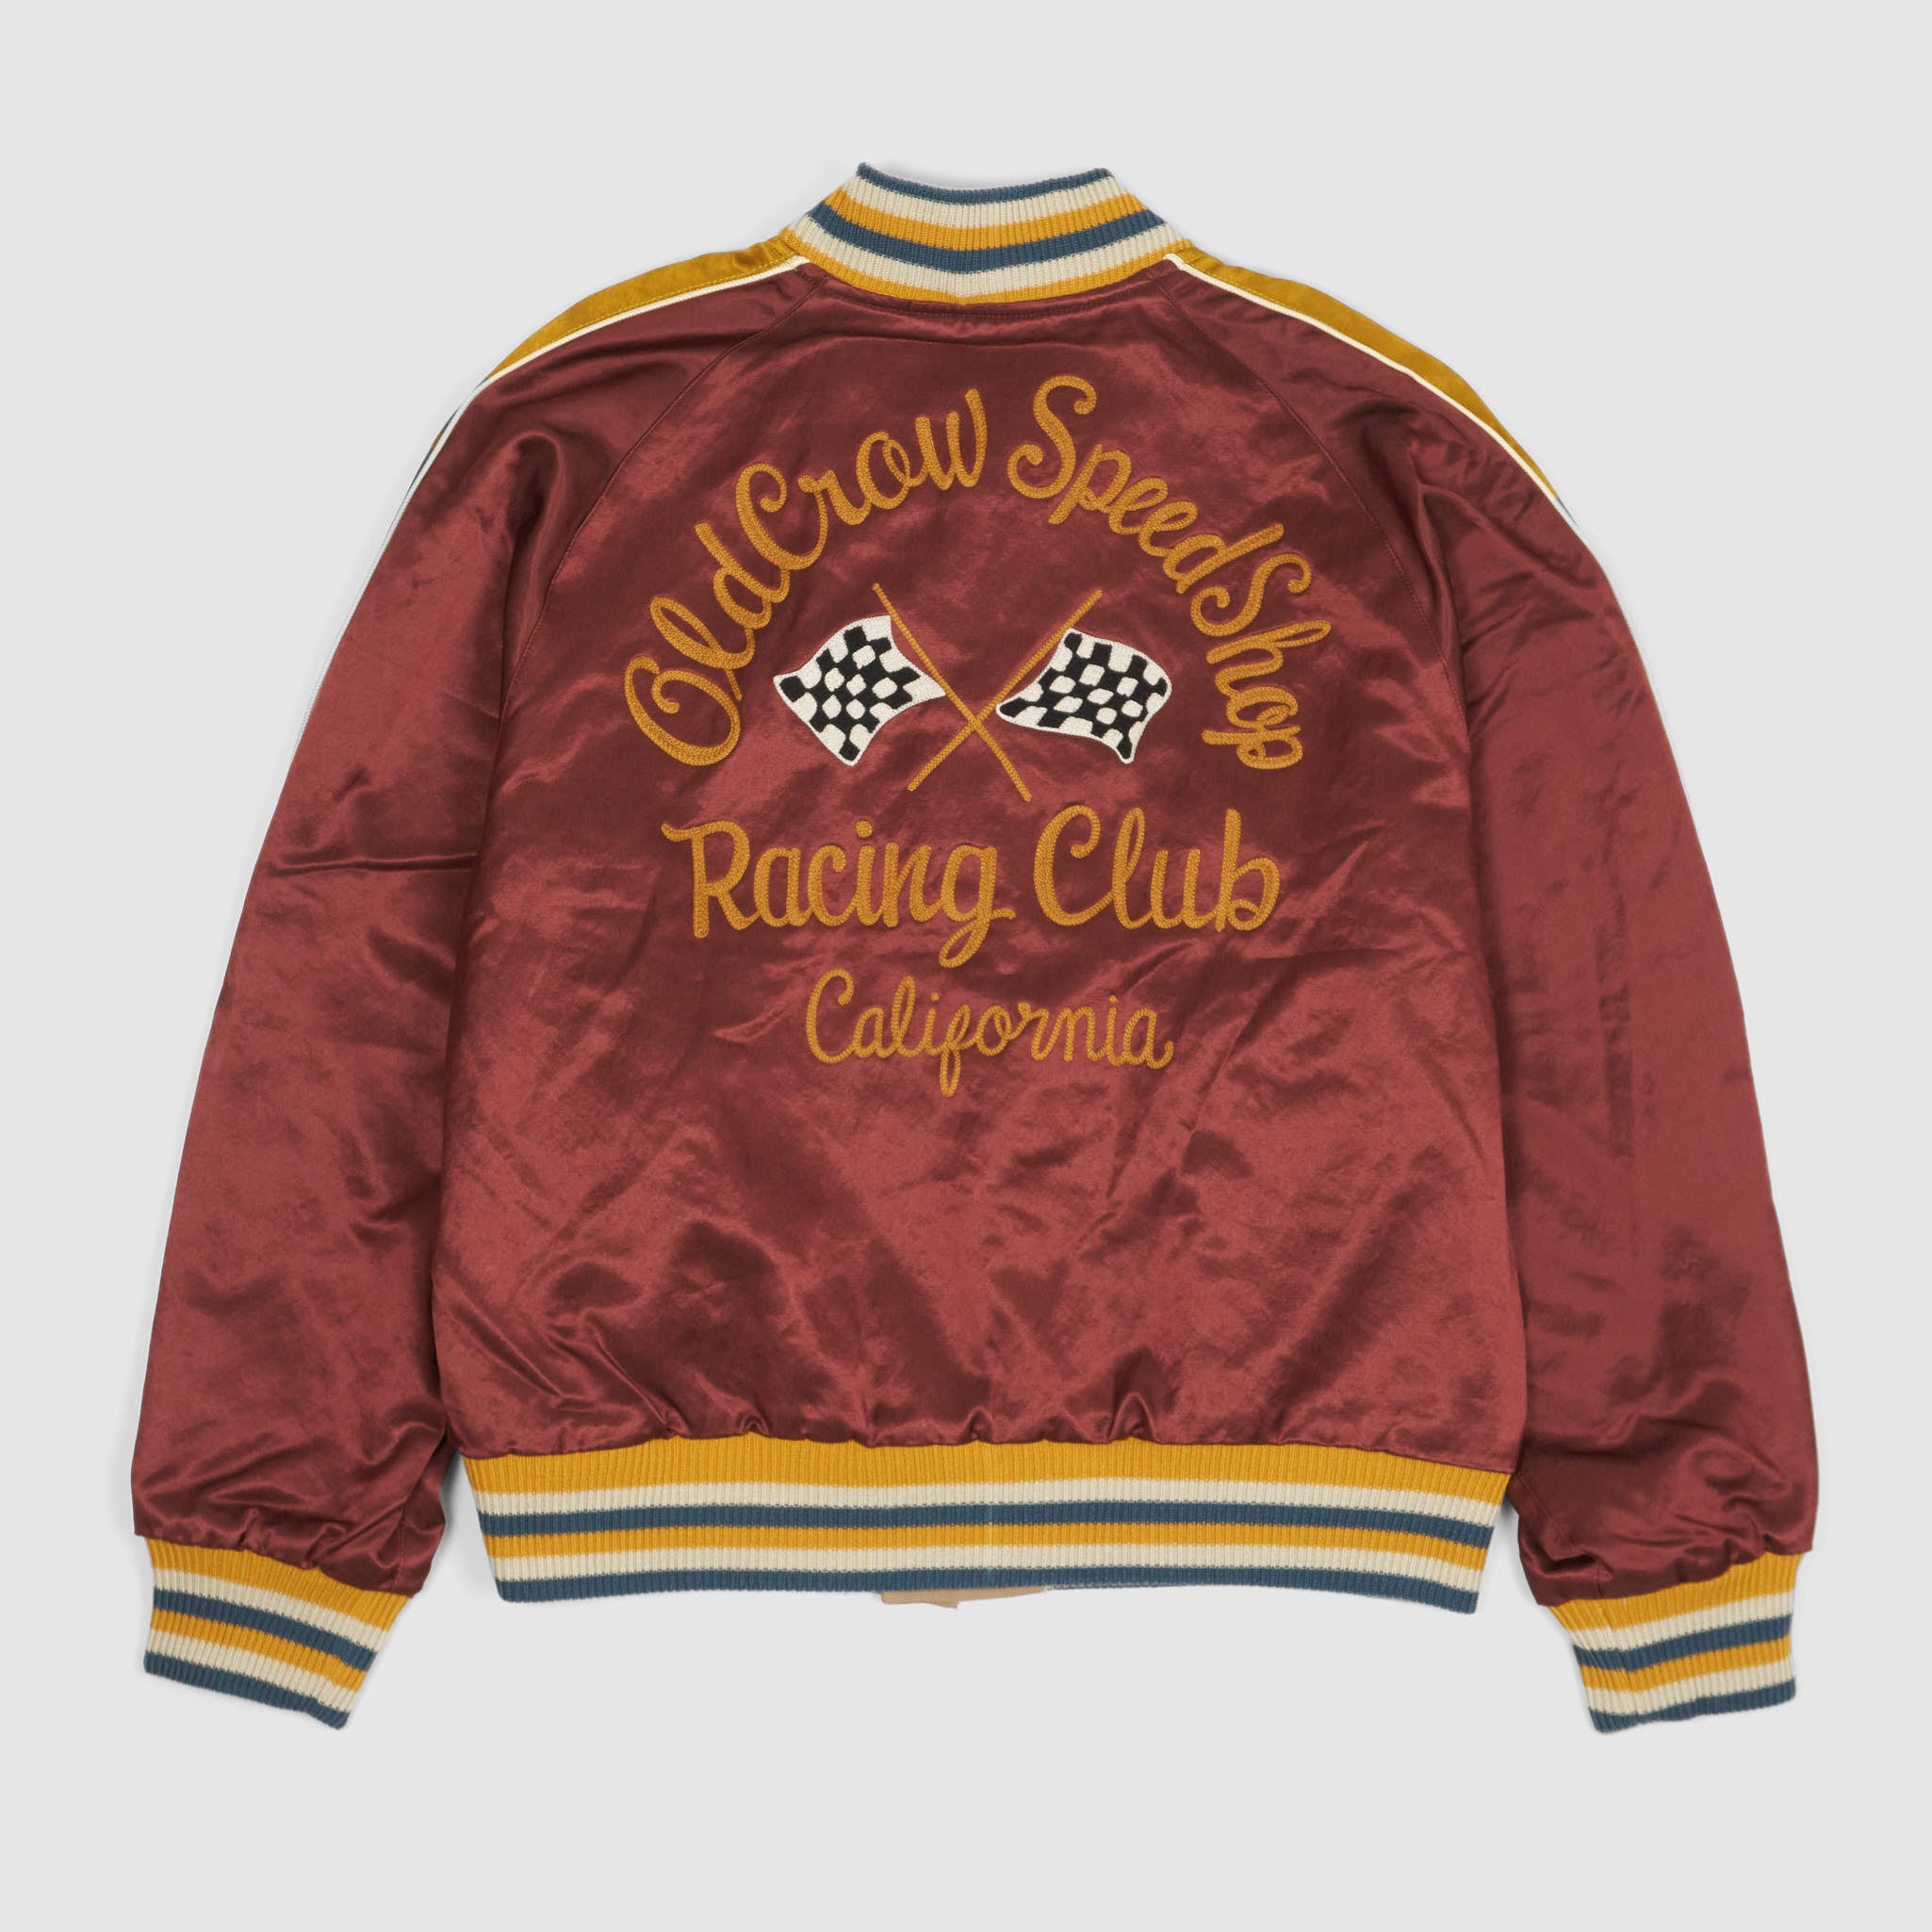 Old Crow Speed Shop by Glad Hand & Co. Reversible Racing Club